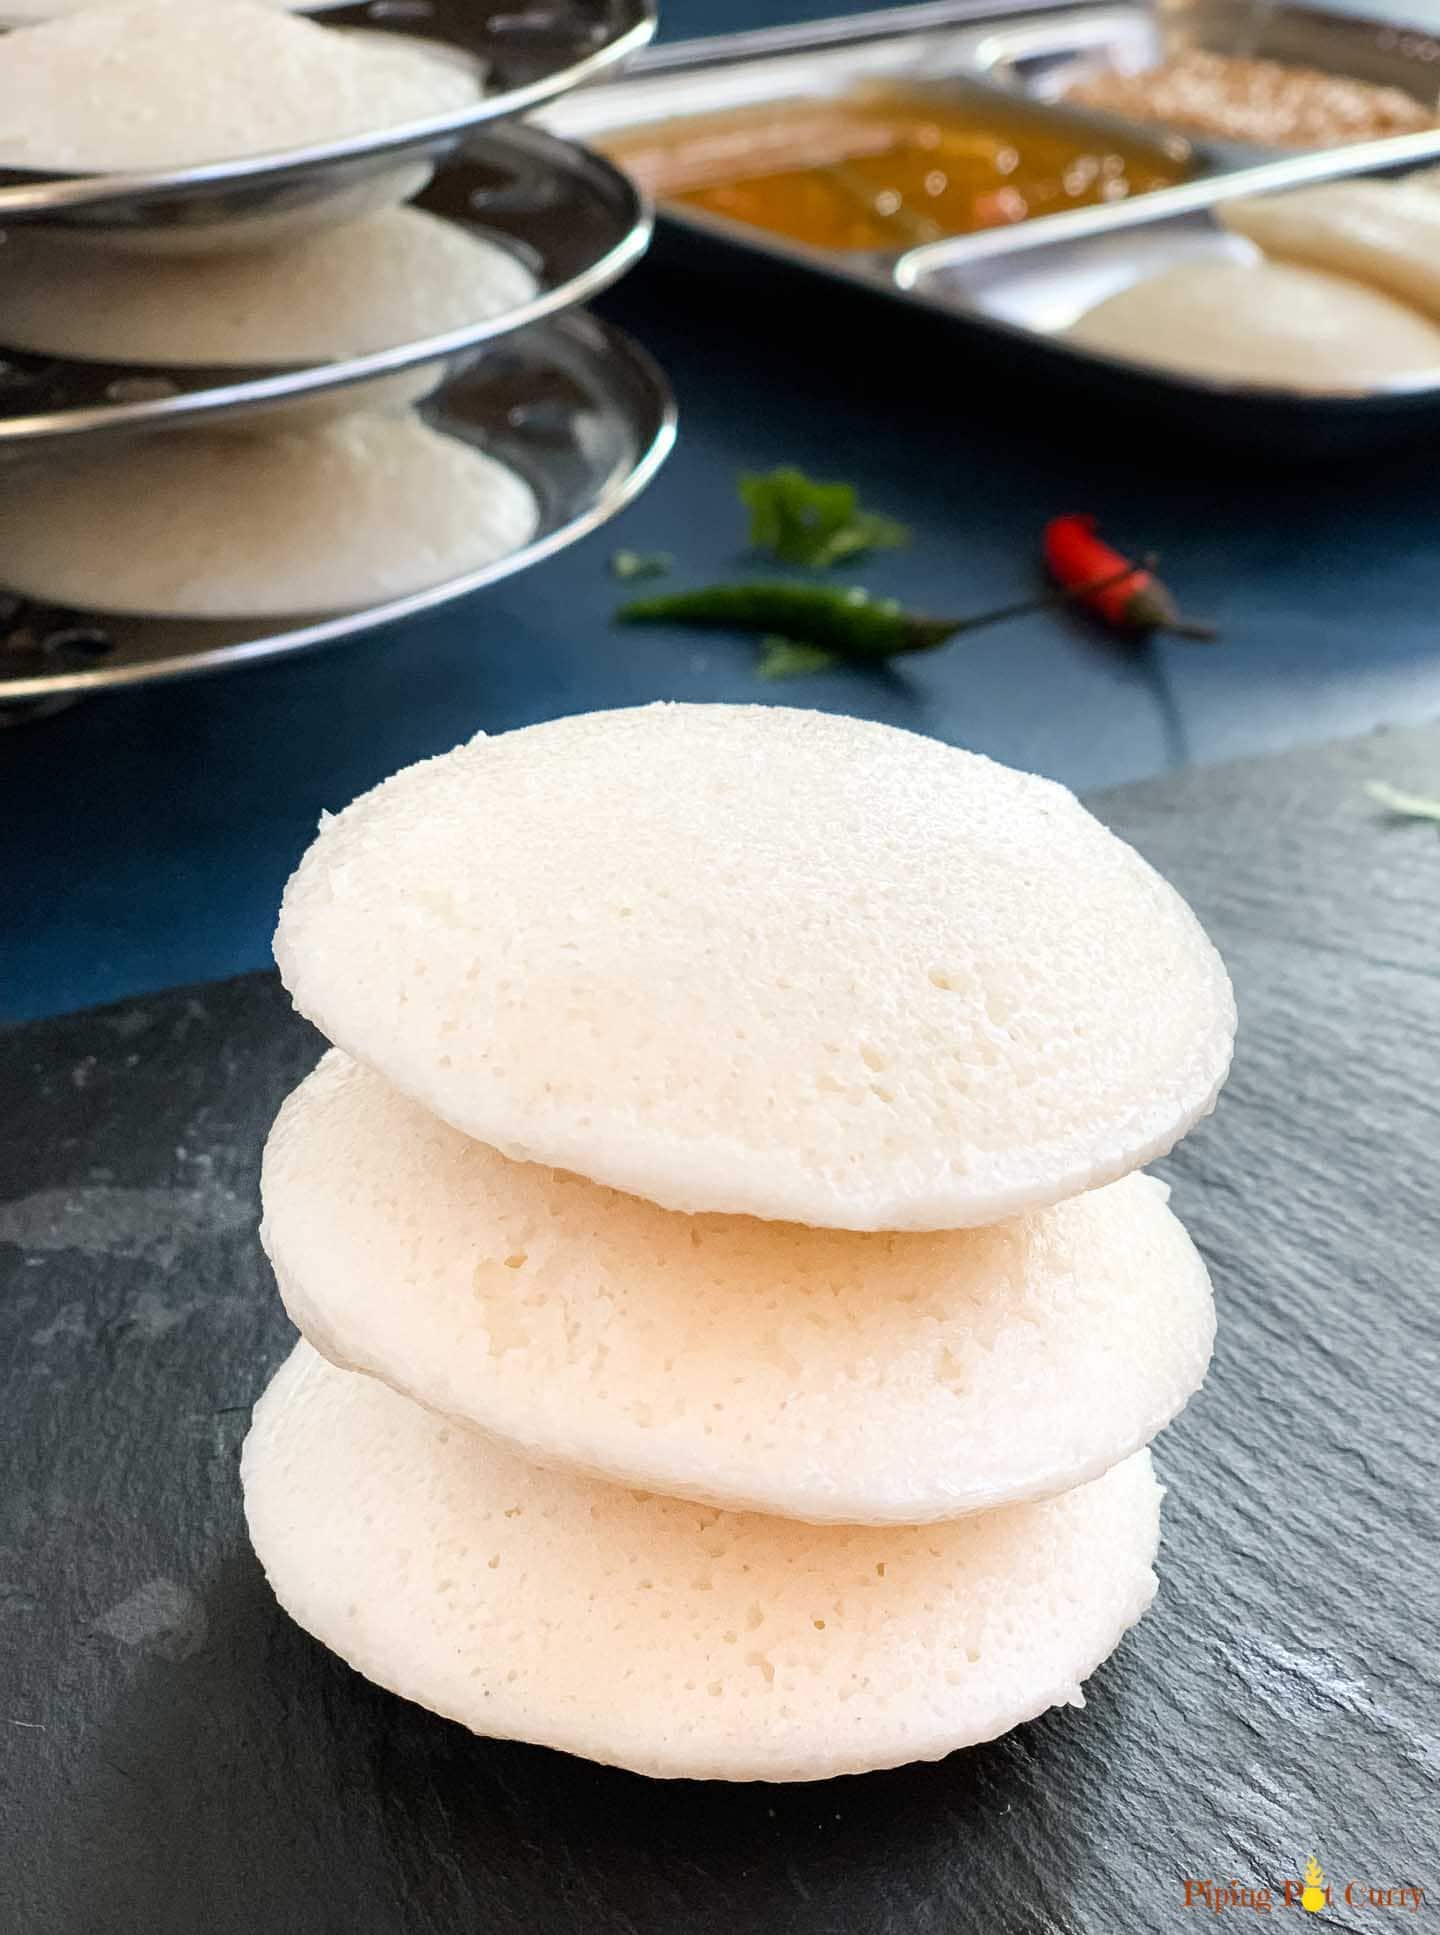 A stack of 3 fluffy spongy idli's